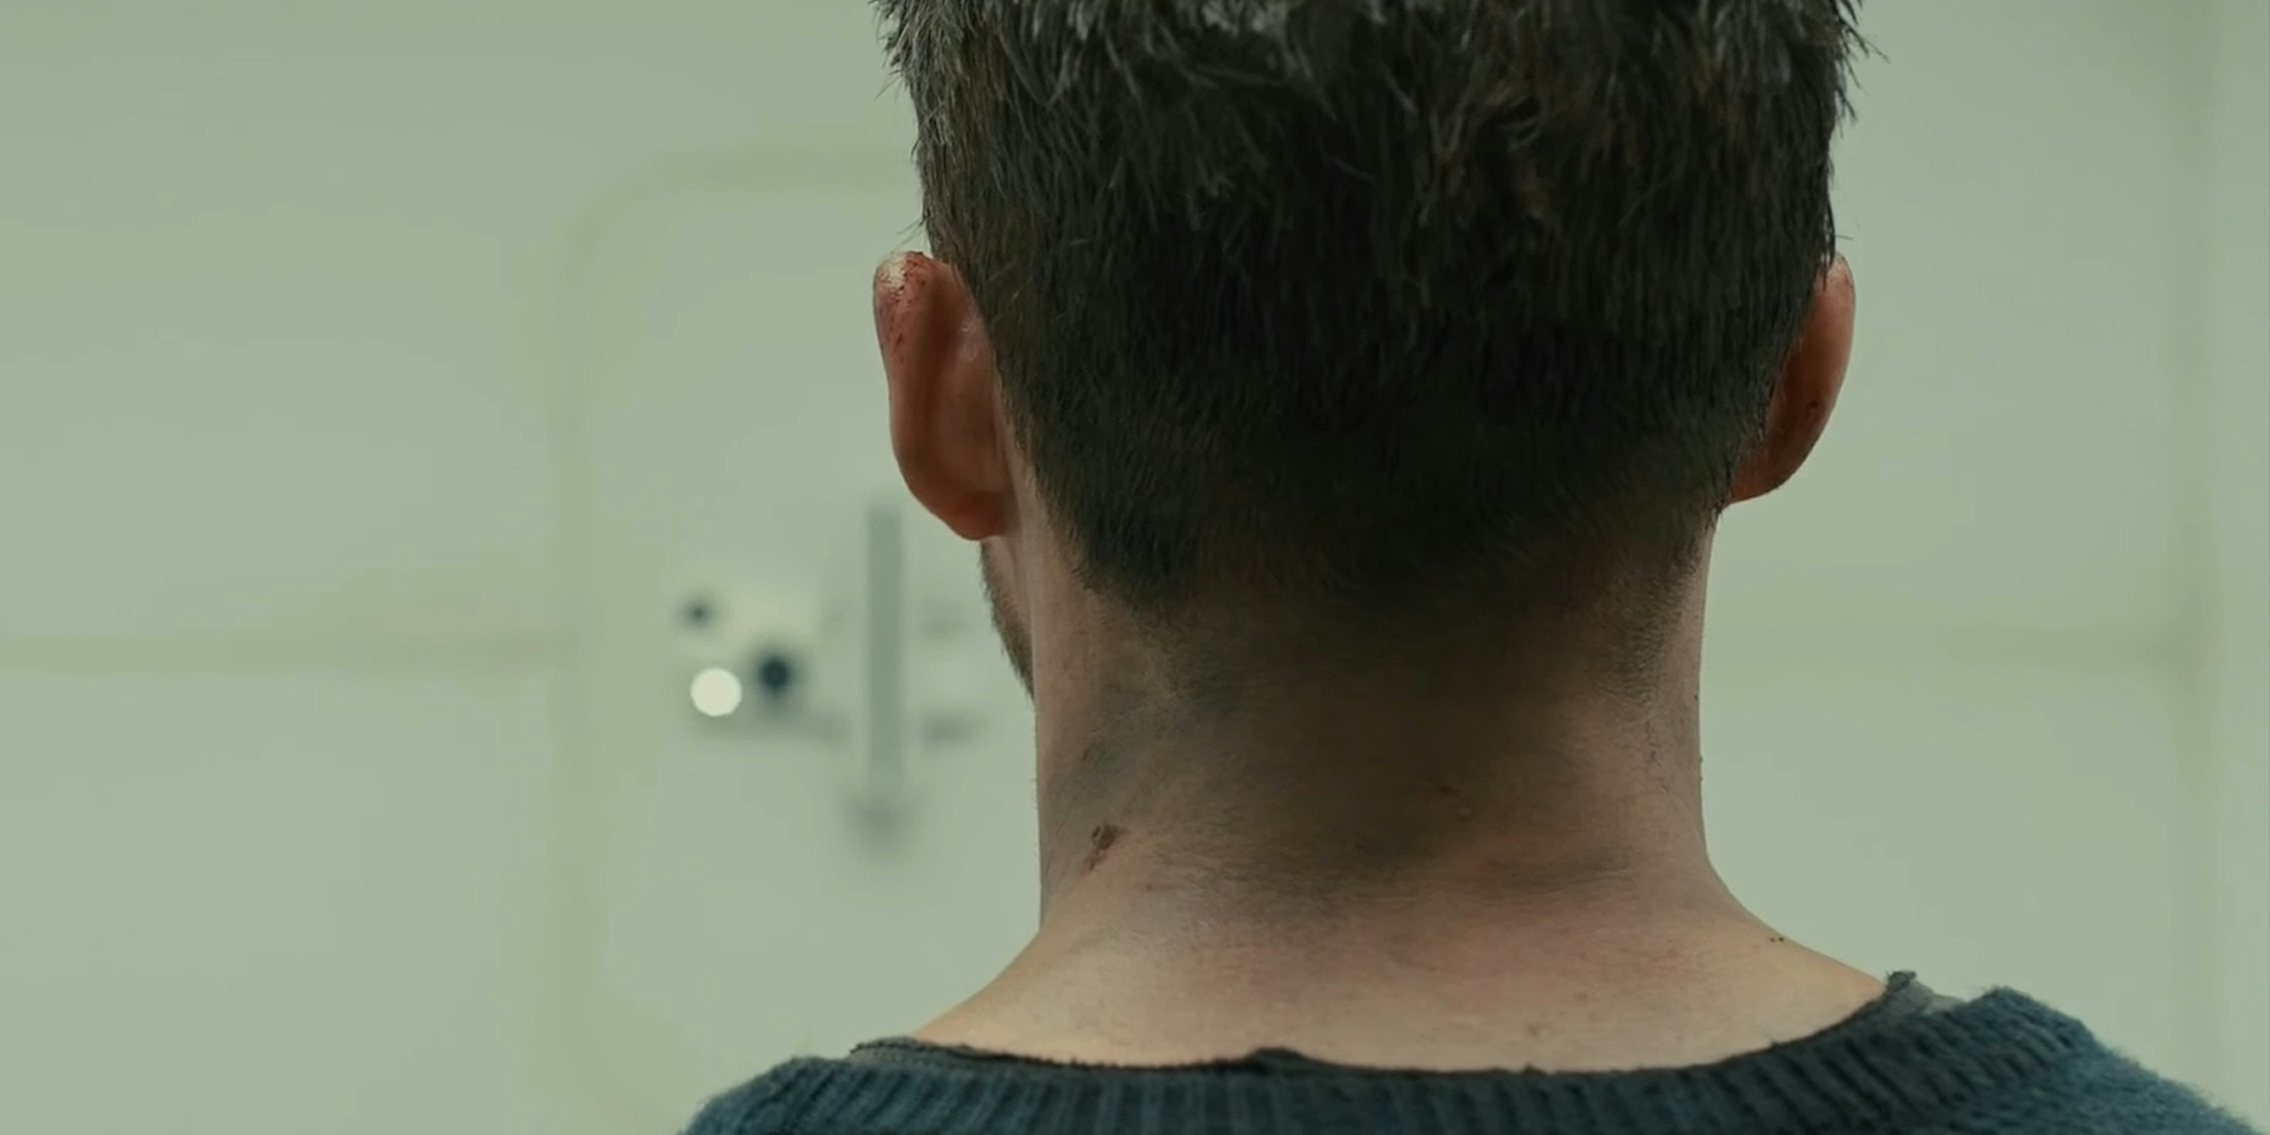 Blade Runner 2049 Cells Interlinked Scene man in front of blurry white wall with electronics